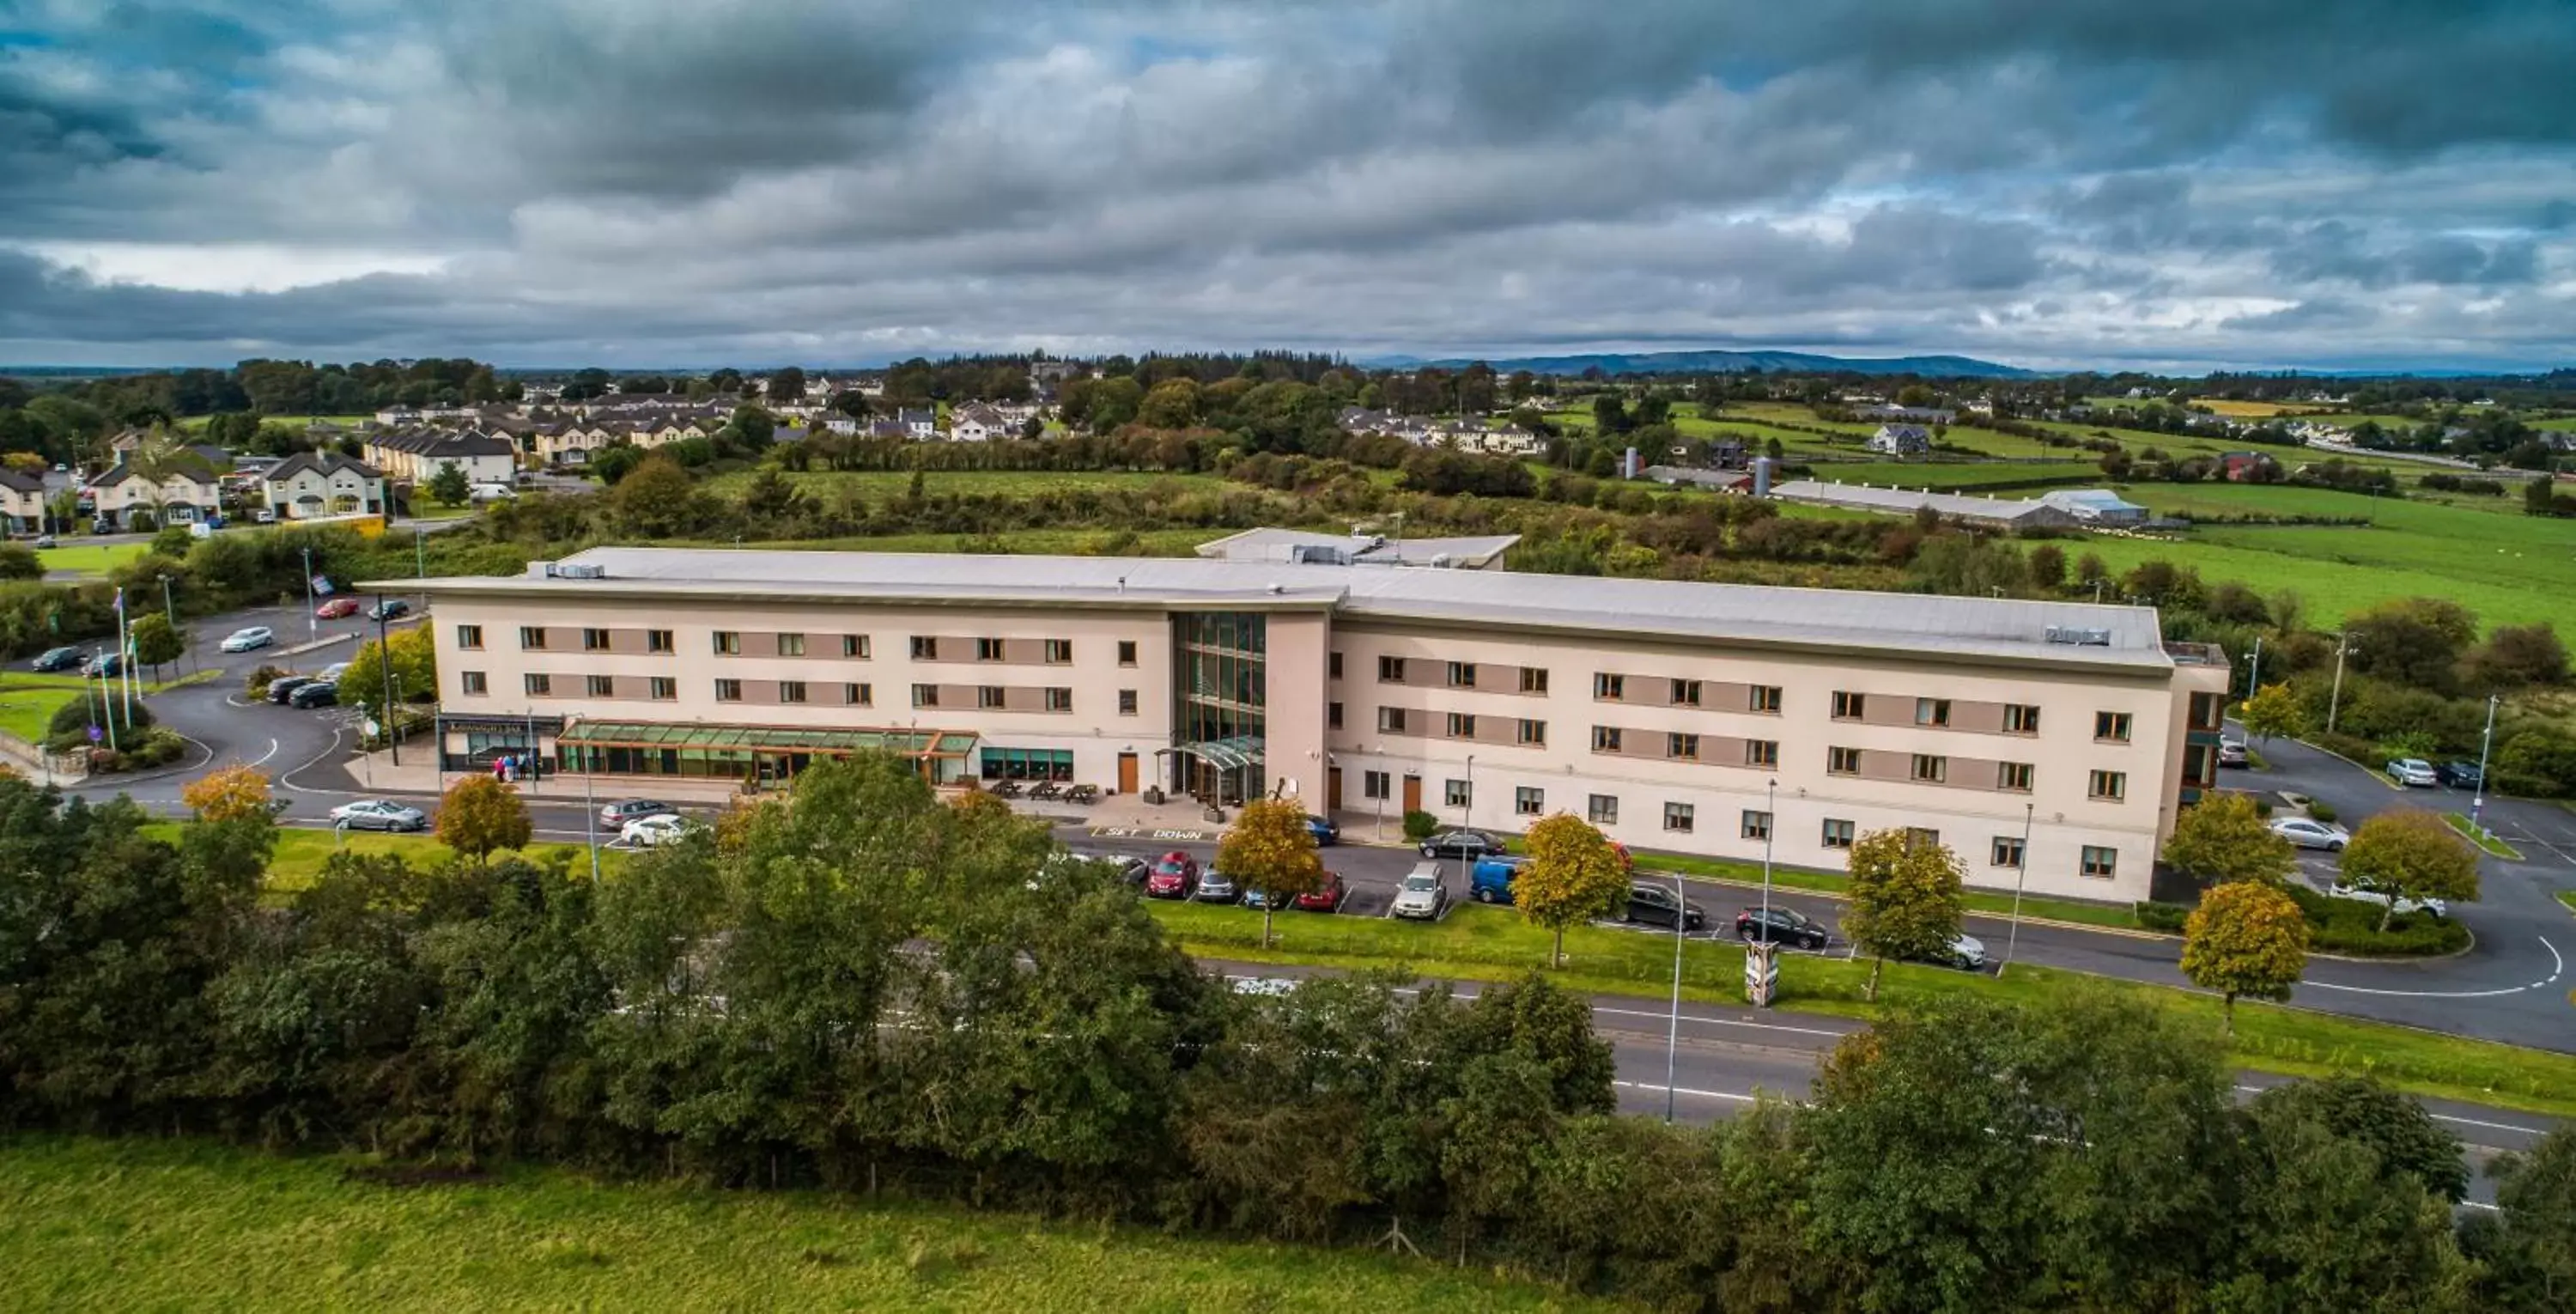 Property building, Bird's-eye View in McWilliam Park Hotel